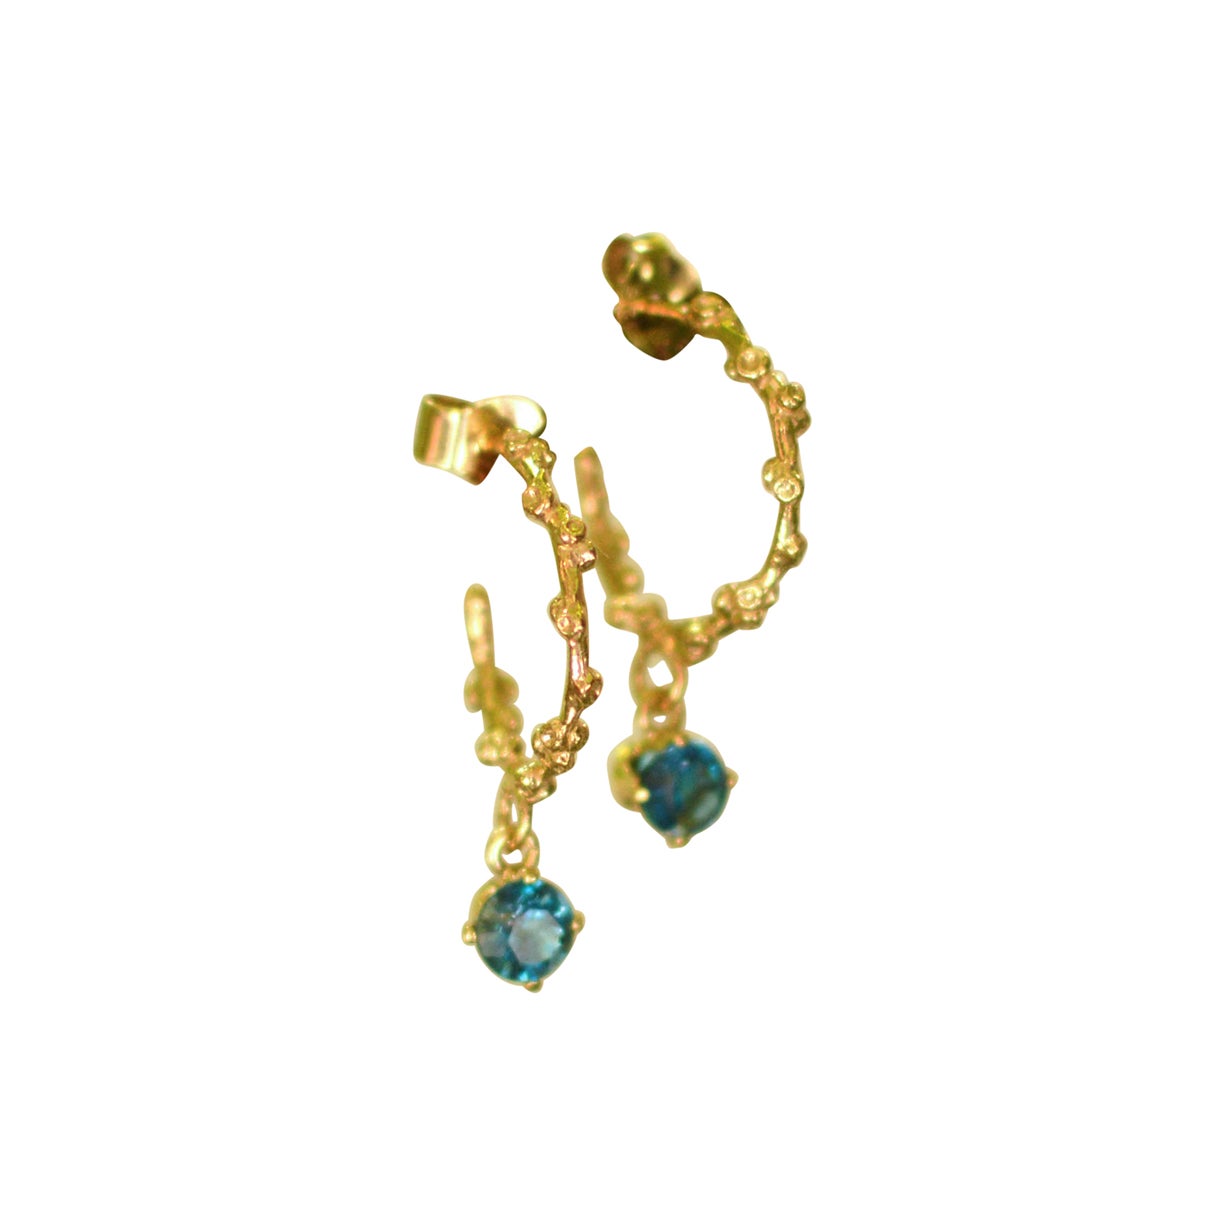 Solid 18 Carat Gold Barnacle Topaz Earrings By Lucy Stopes-Roe